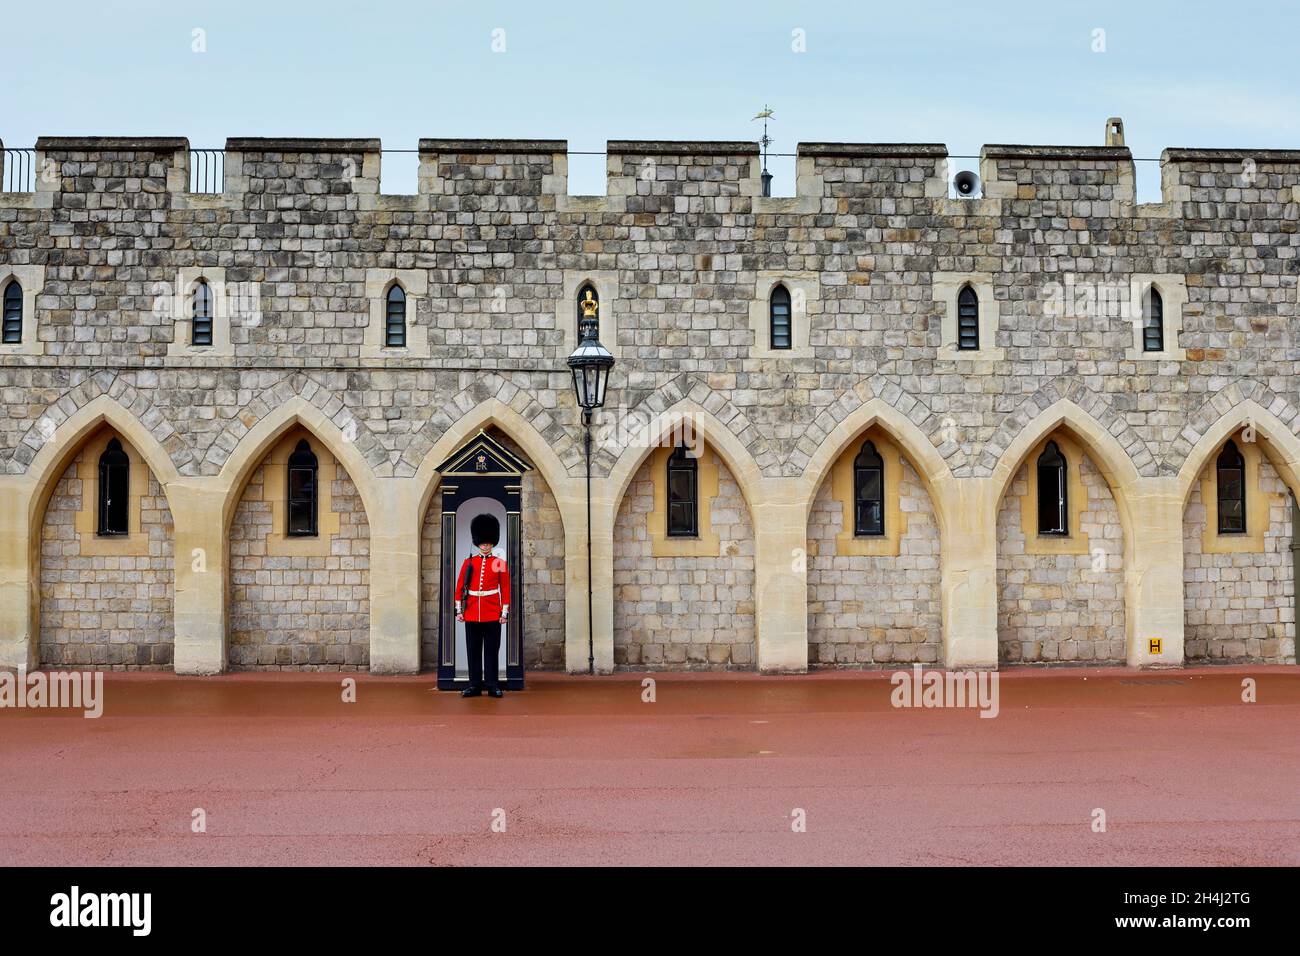 Changing the Guard at Windsor Castle, Berkshire England. The Queen's Guard are also known as British Guards and Queen's Life Guard. Stock Photo